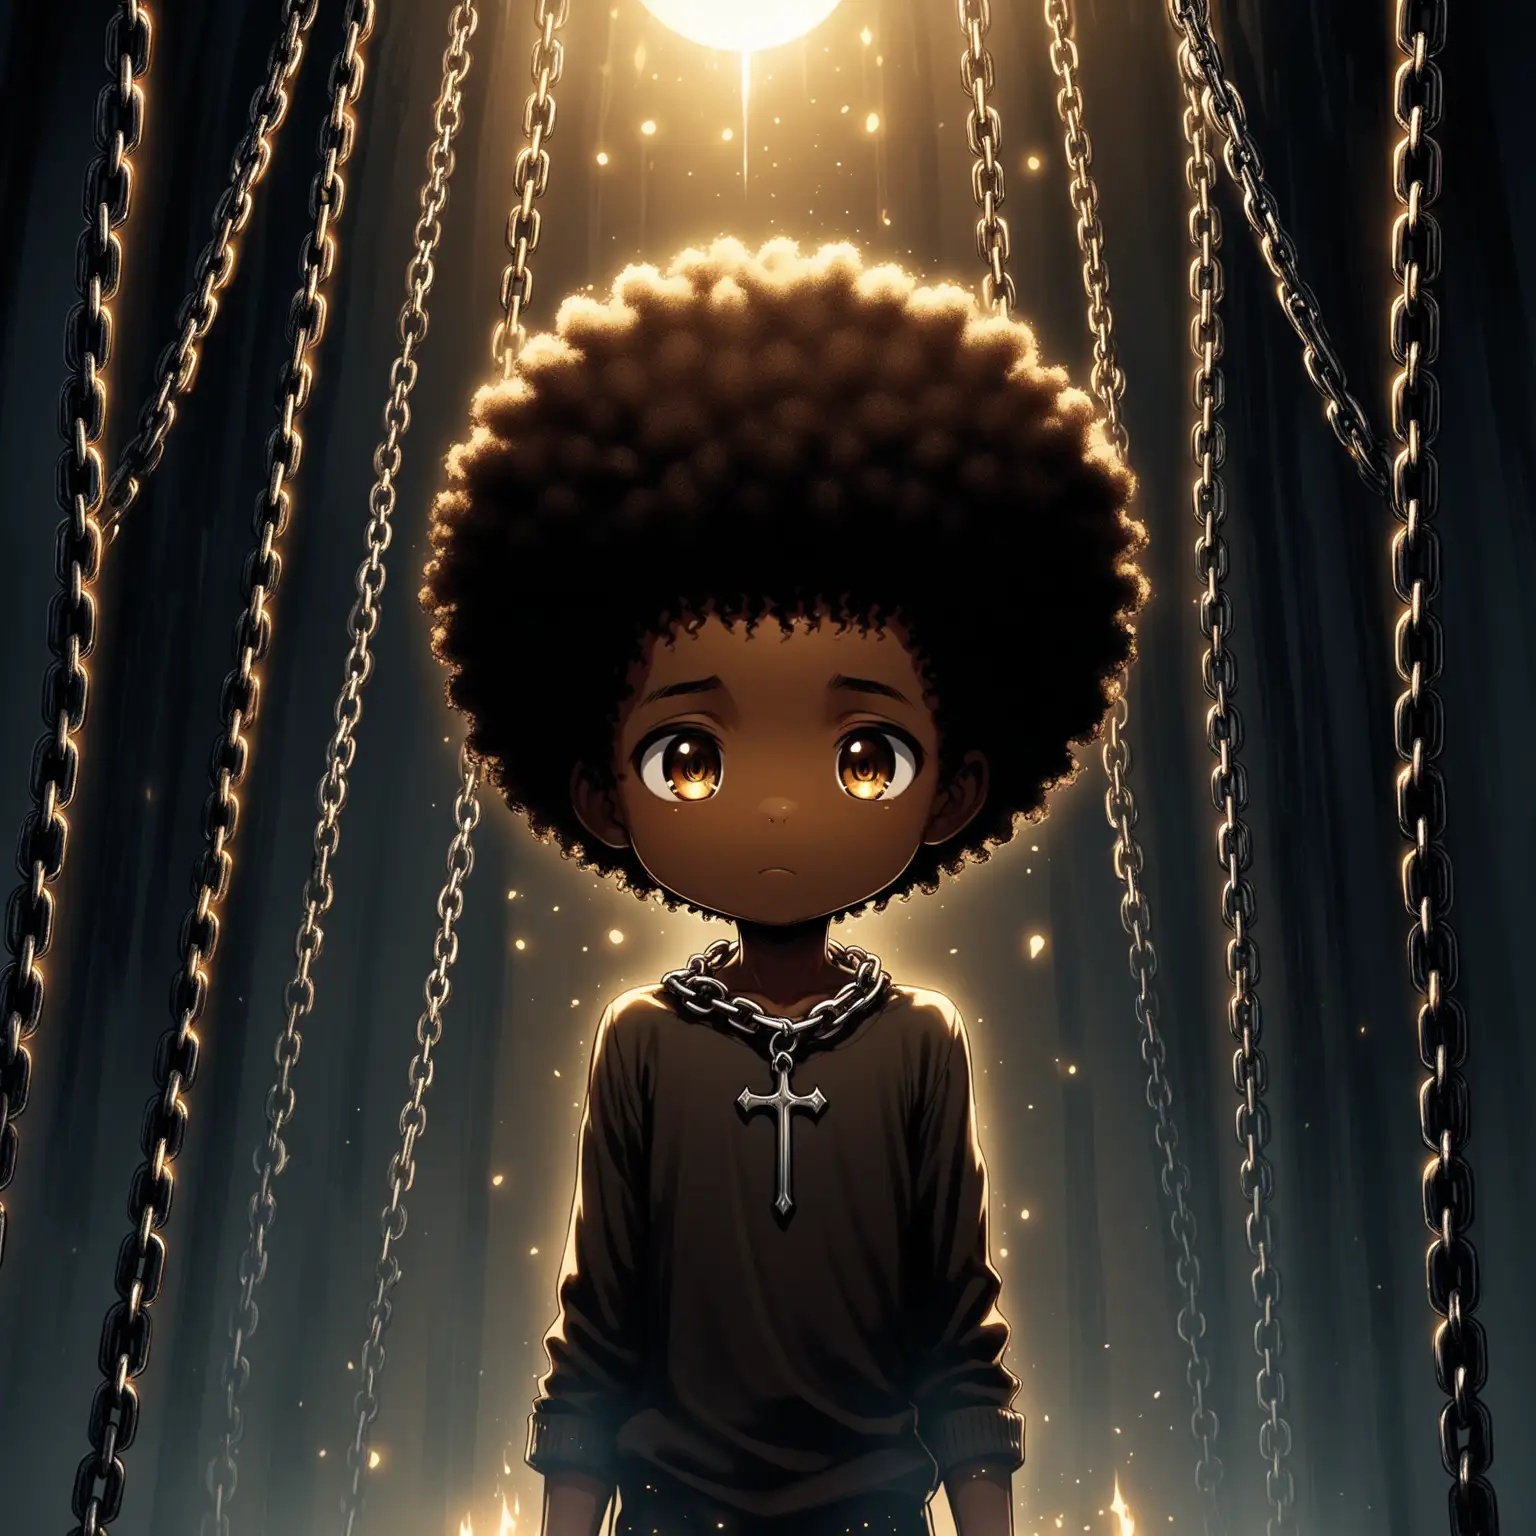 Adorable BrownSkinned Boy in Gothic House Surrounded by Violent Spirits and Steel Chains